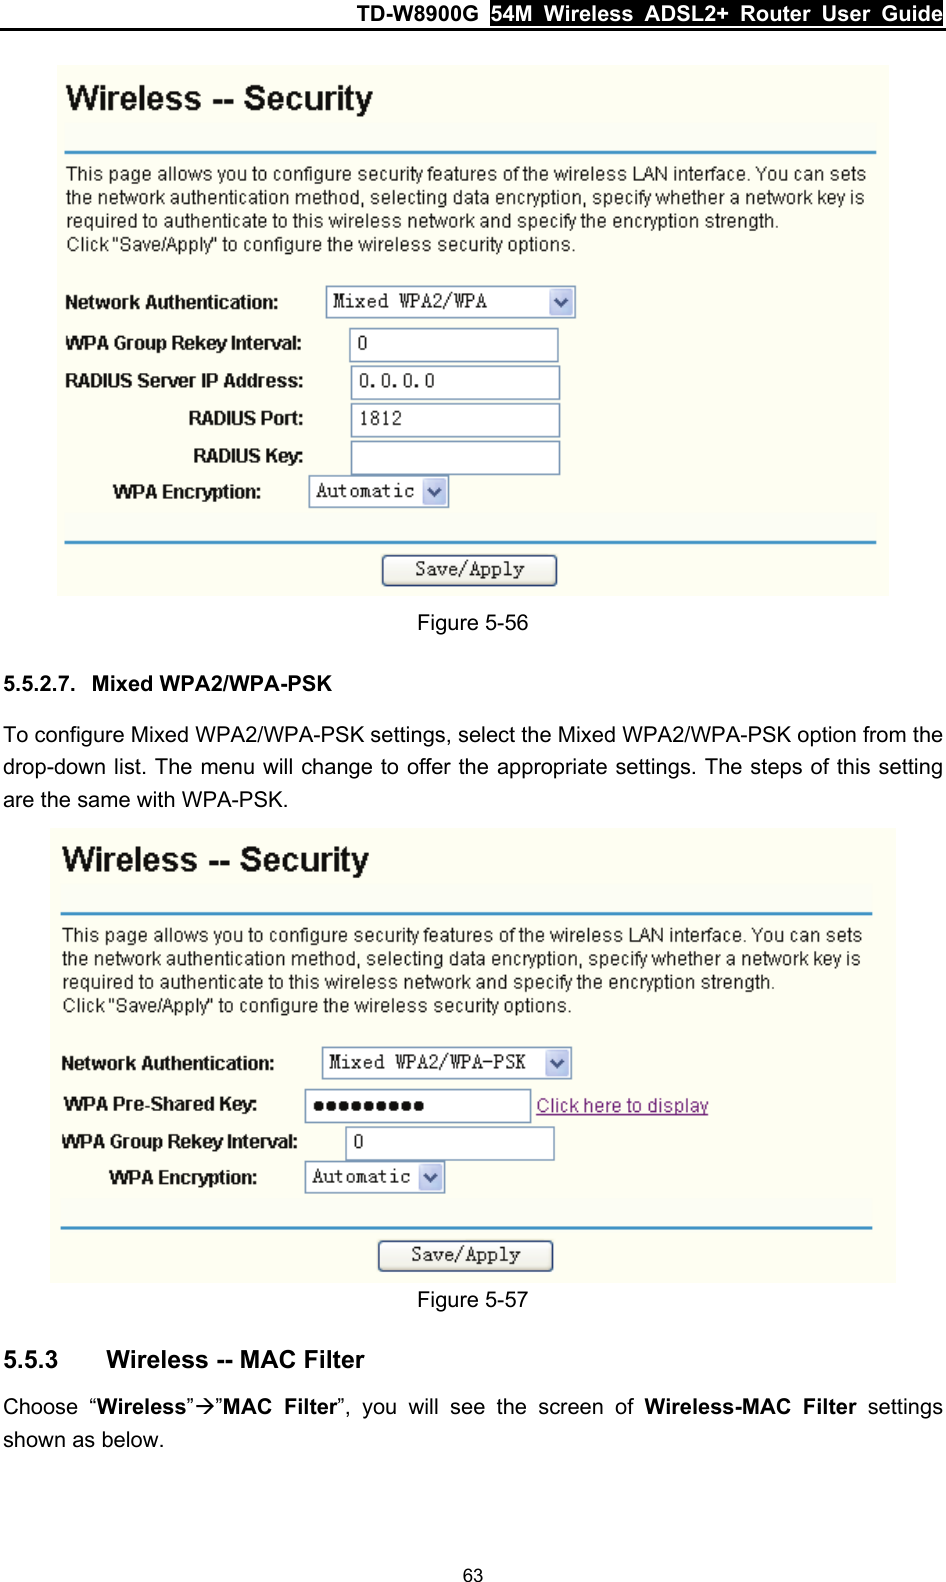 TD-W8900G  54M Wireless ADSL2+ Router User Guide 63  Figure 5-56 5.5.2.7.  Mixed WPA2/WPA-PSK To configure Mixed WPA2/WPA-PSK settings, select the Mixed WPA2/WPA-PSK option from the drop-down list. The menu will change to offer the appropriate settings. The steps of this setting are the same with WPA-PSK.  Figure 5-57 5.5.3  Wireless -- MAC Filter Choose “Wireless”Æ”MAC Filter”, you will see the screen of Wireless-MAC Filter settings shown as below. 